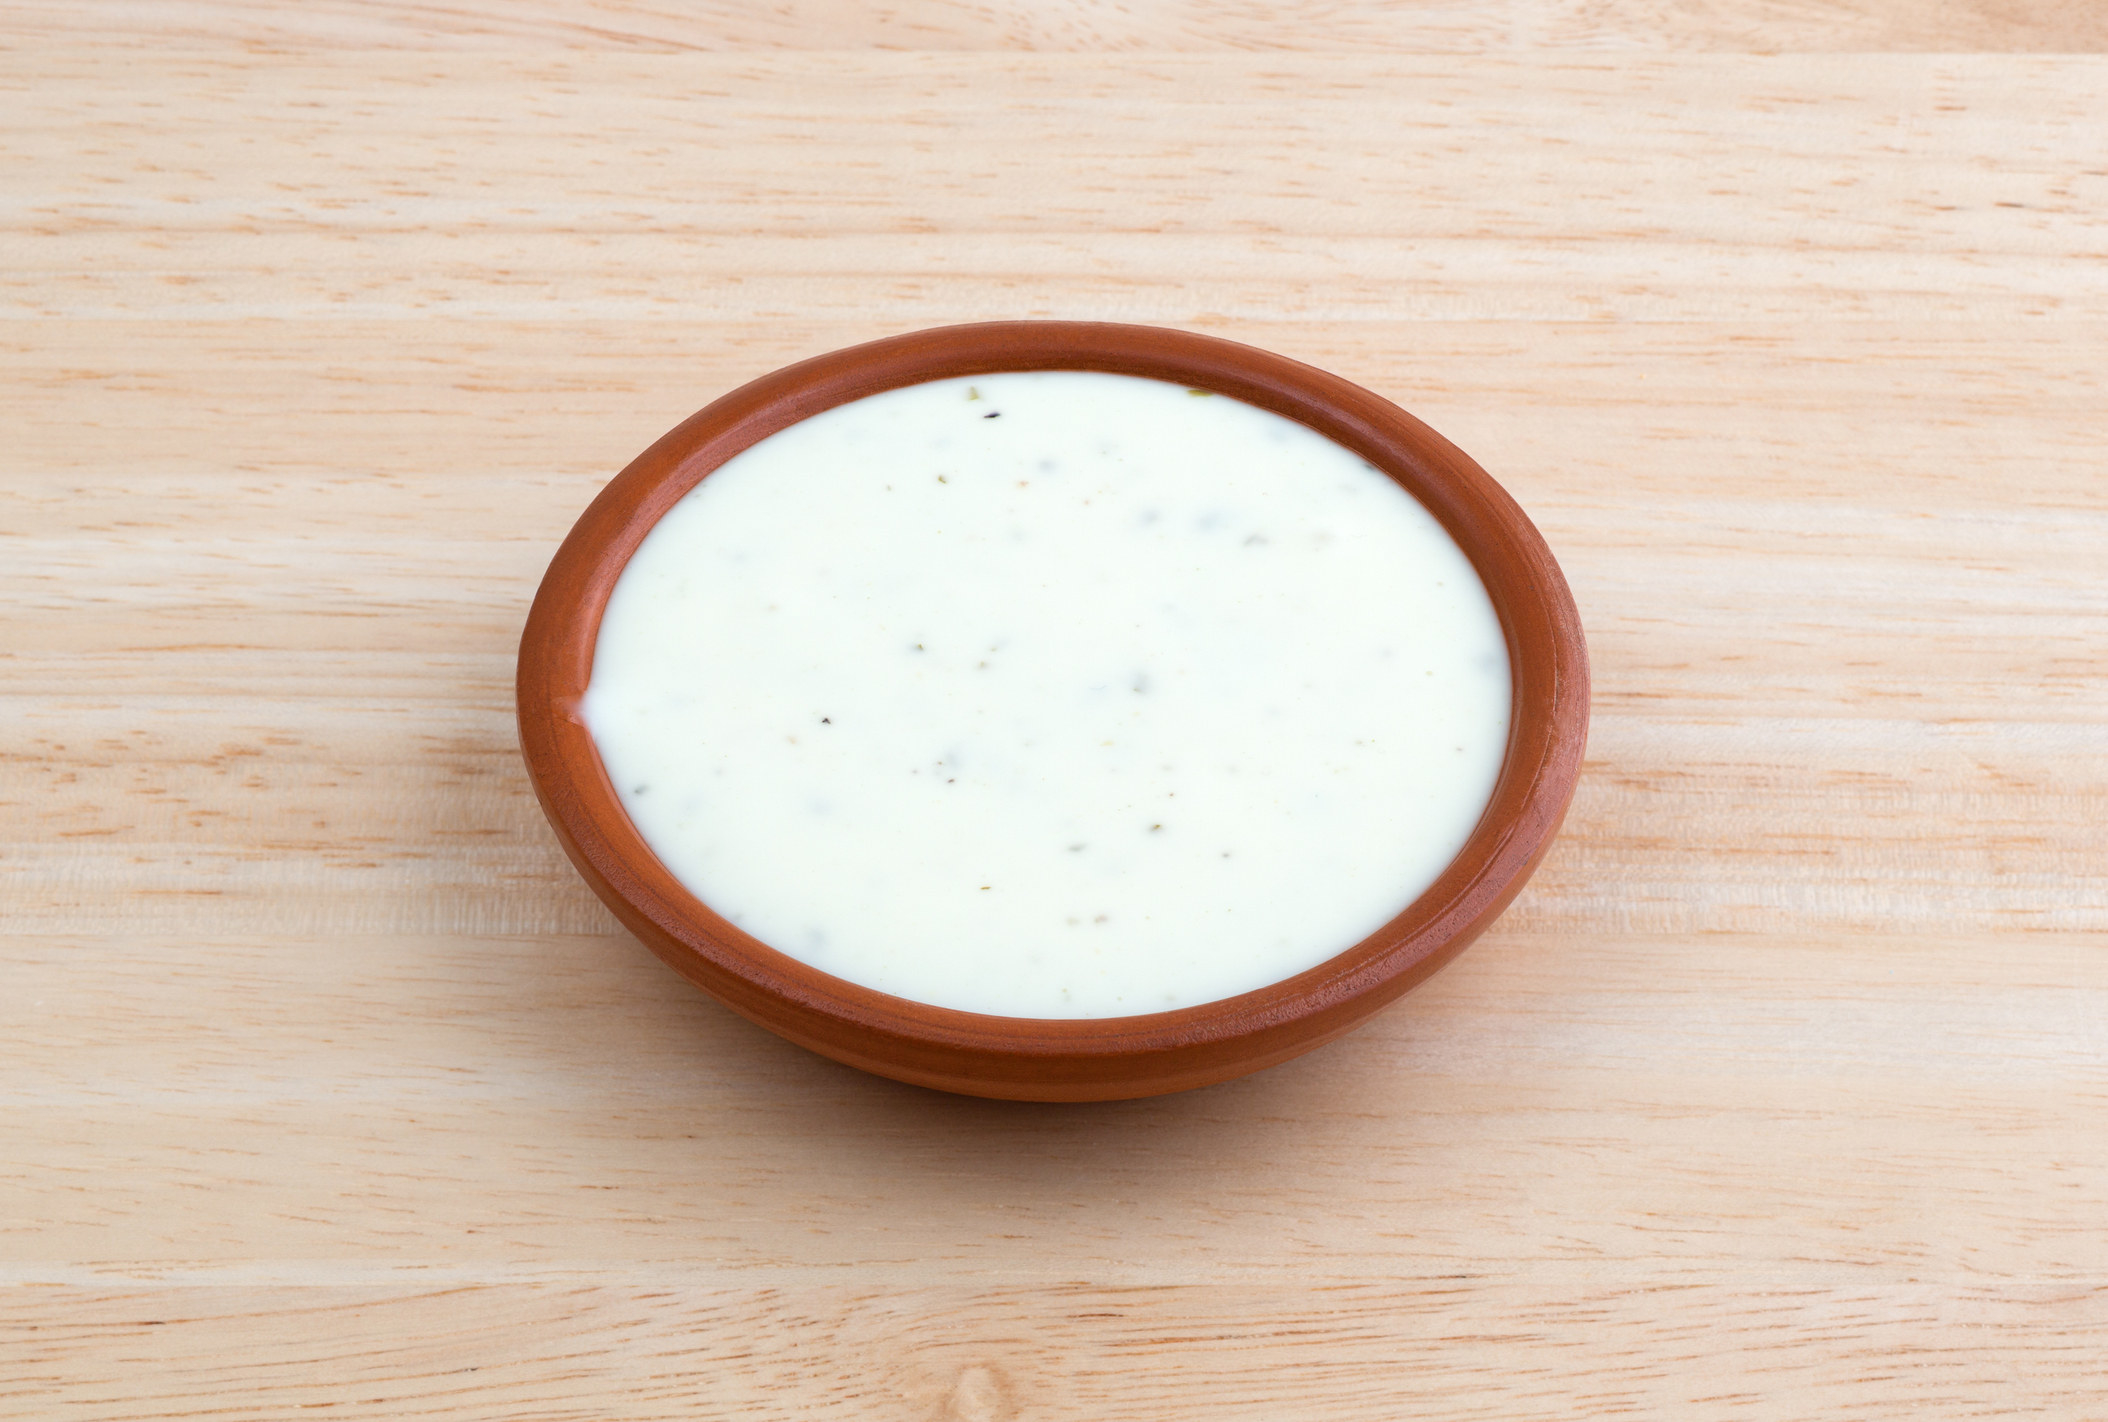 A little bowl of ranch